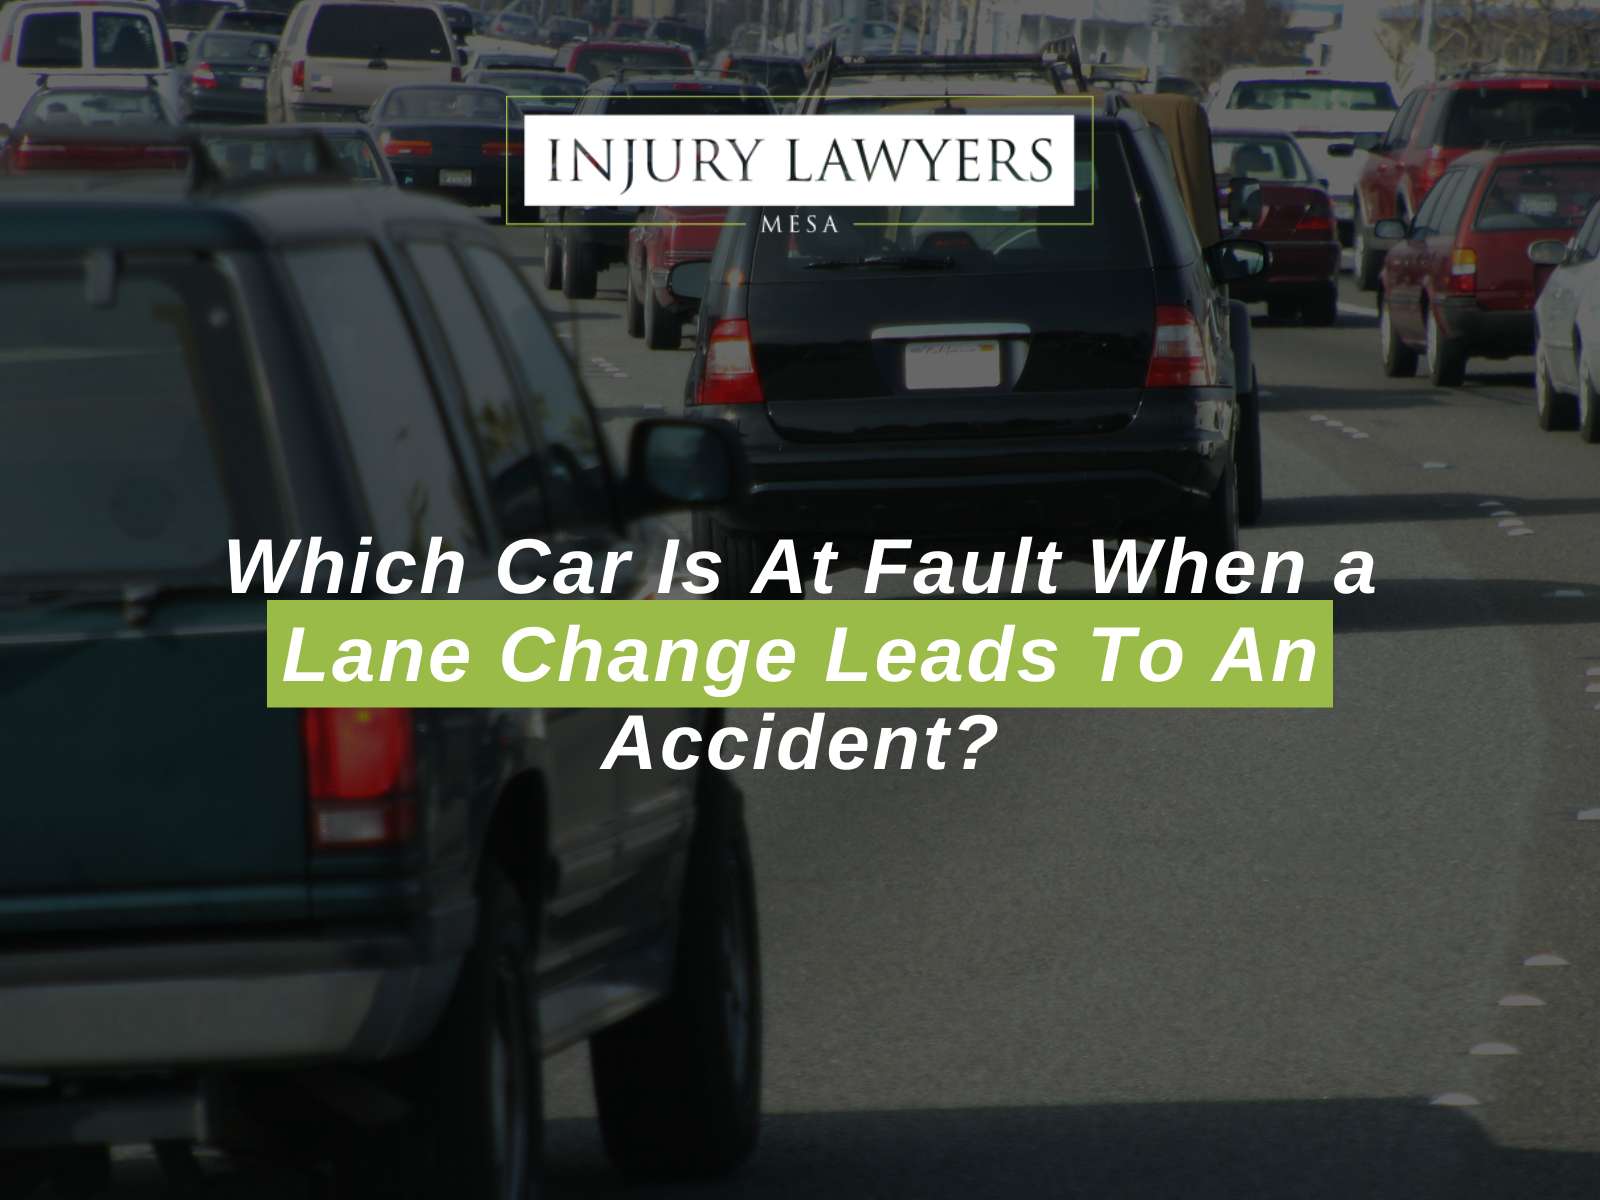 Which Car Is At Fault When a Lane Change Leads To An Accident